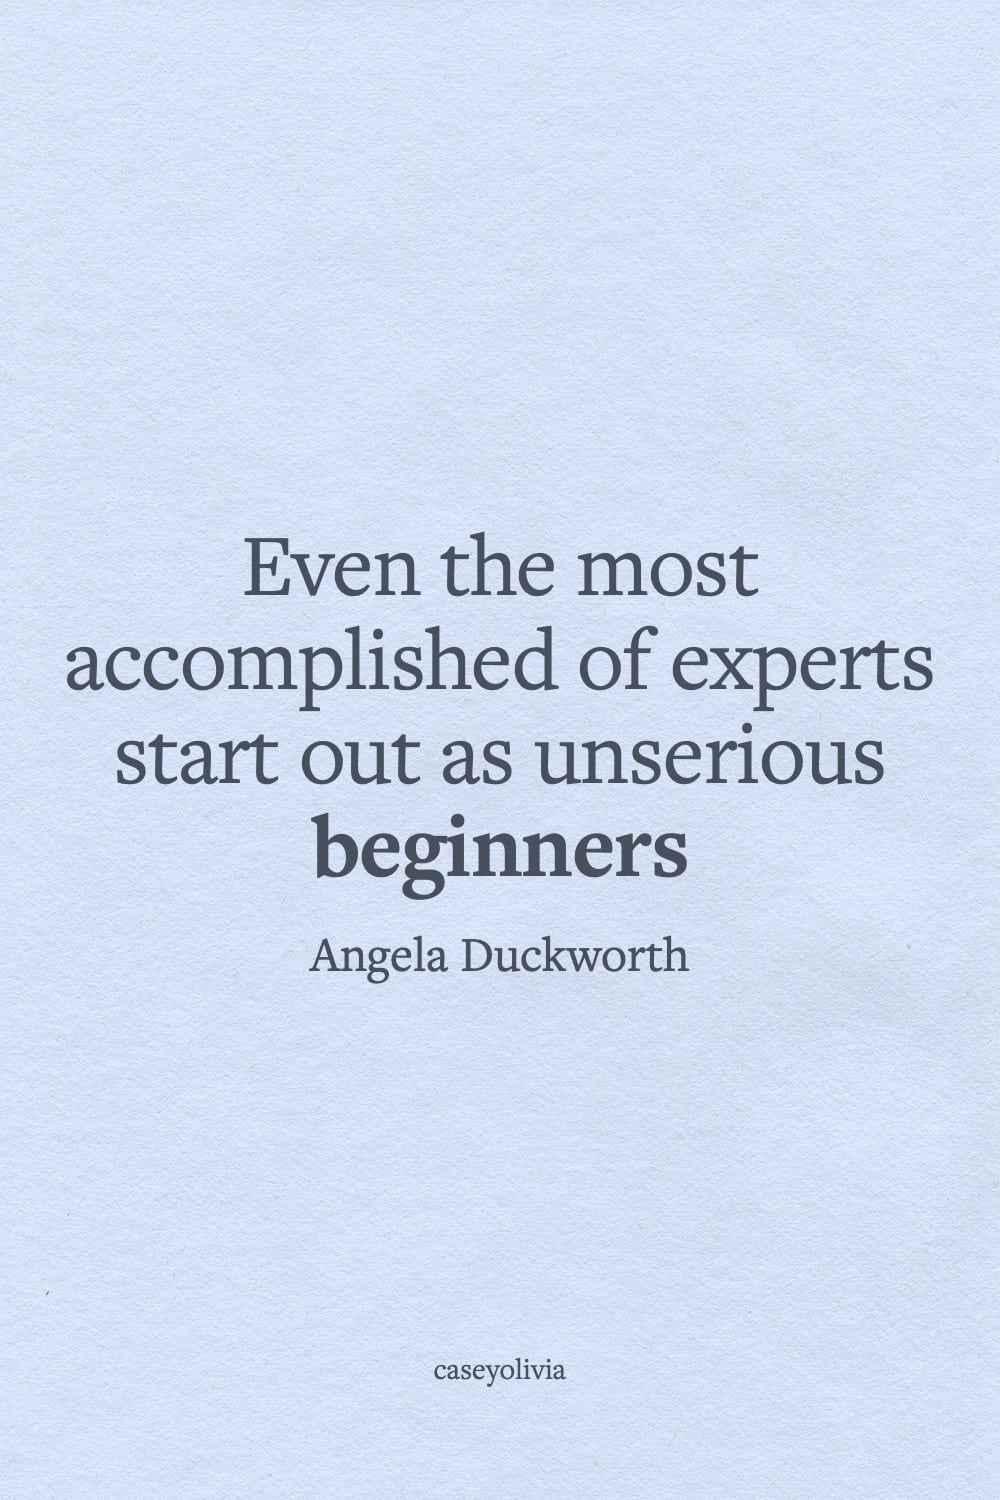 angela duckworth experts start as beginners quote